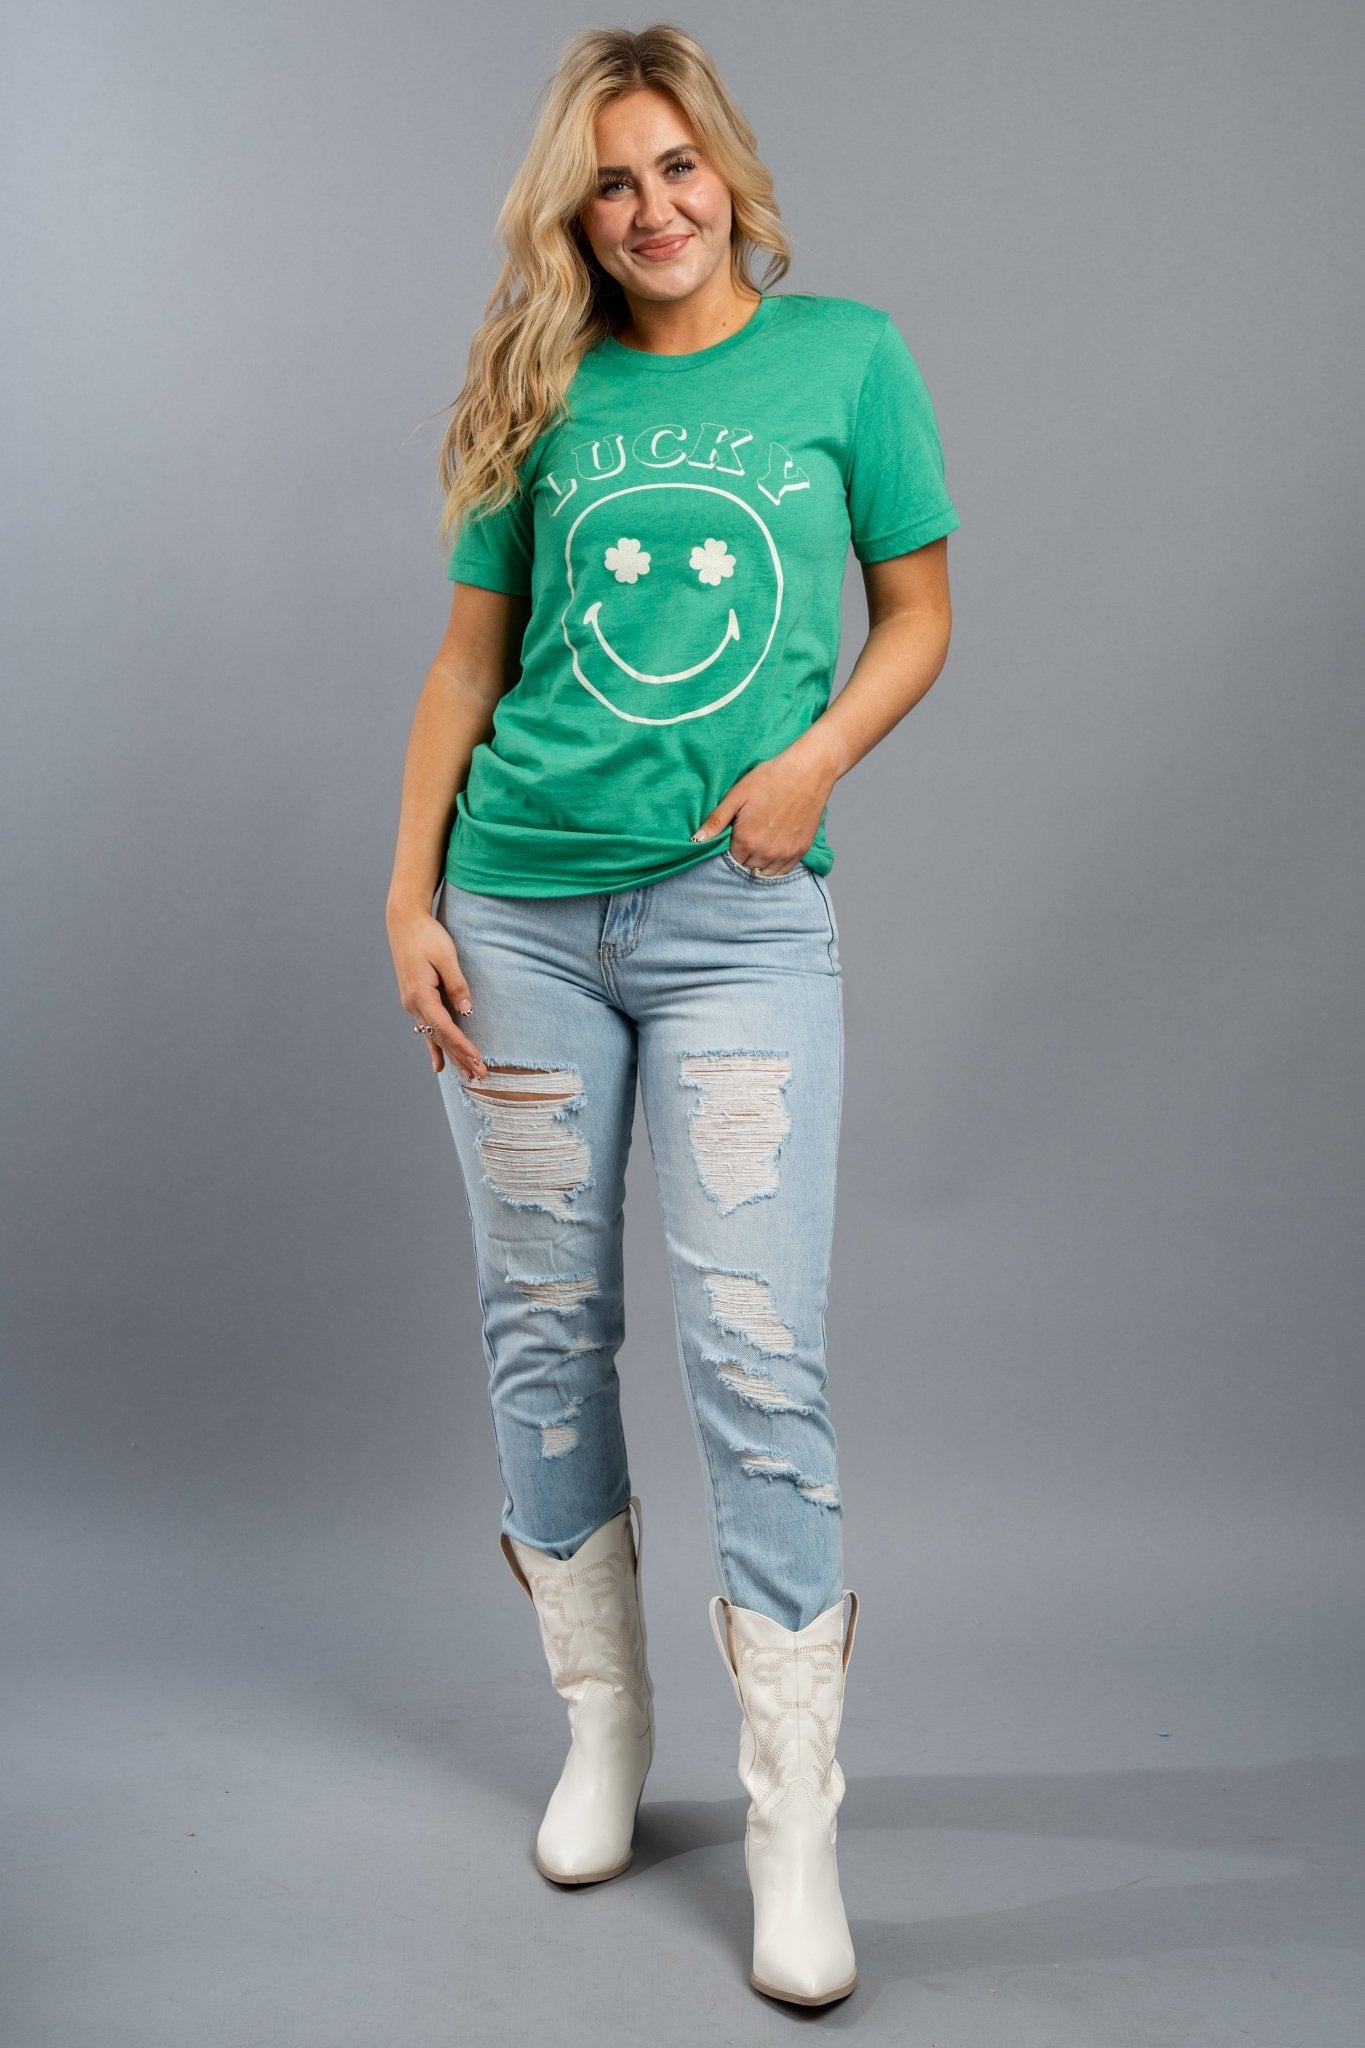 Lucky smiley unisex short sleeve t-shirt kelly green - Trendy T-shirts - Fashion Graphic T-Shirts at Lush Fashion Lounge Boutique in Oklahoma City